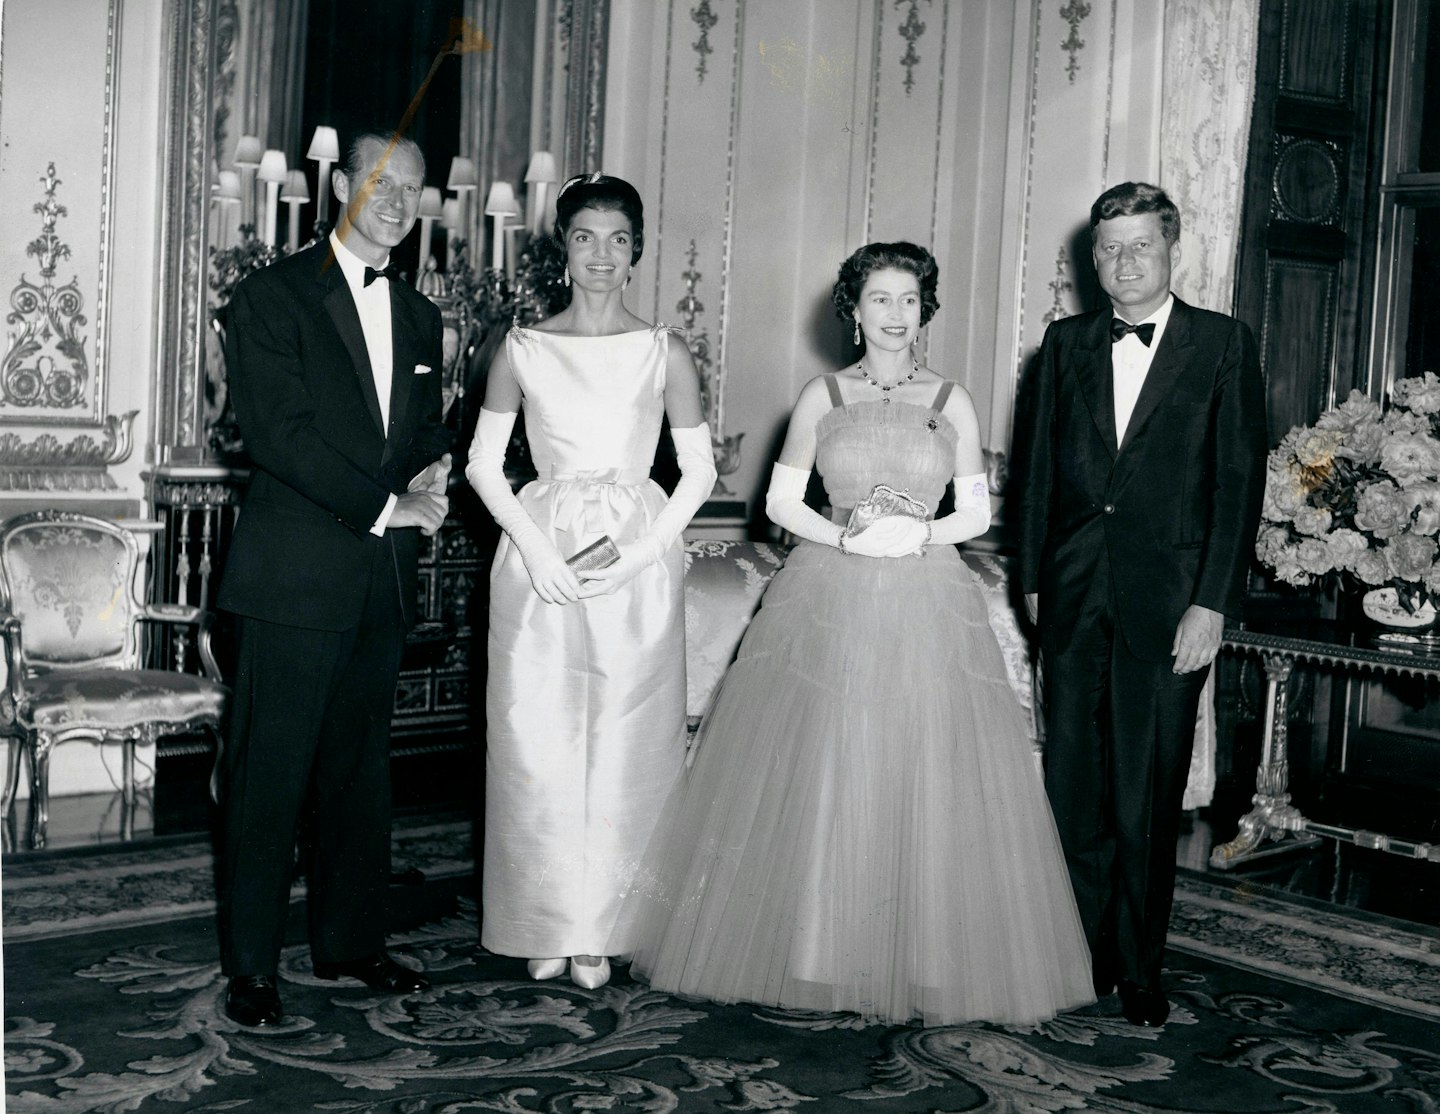 Queen Elizabeth II with her husband Prince Philip withKennedy's